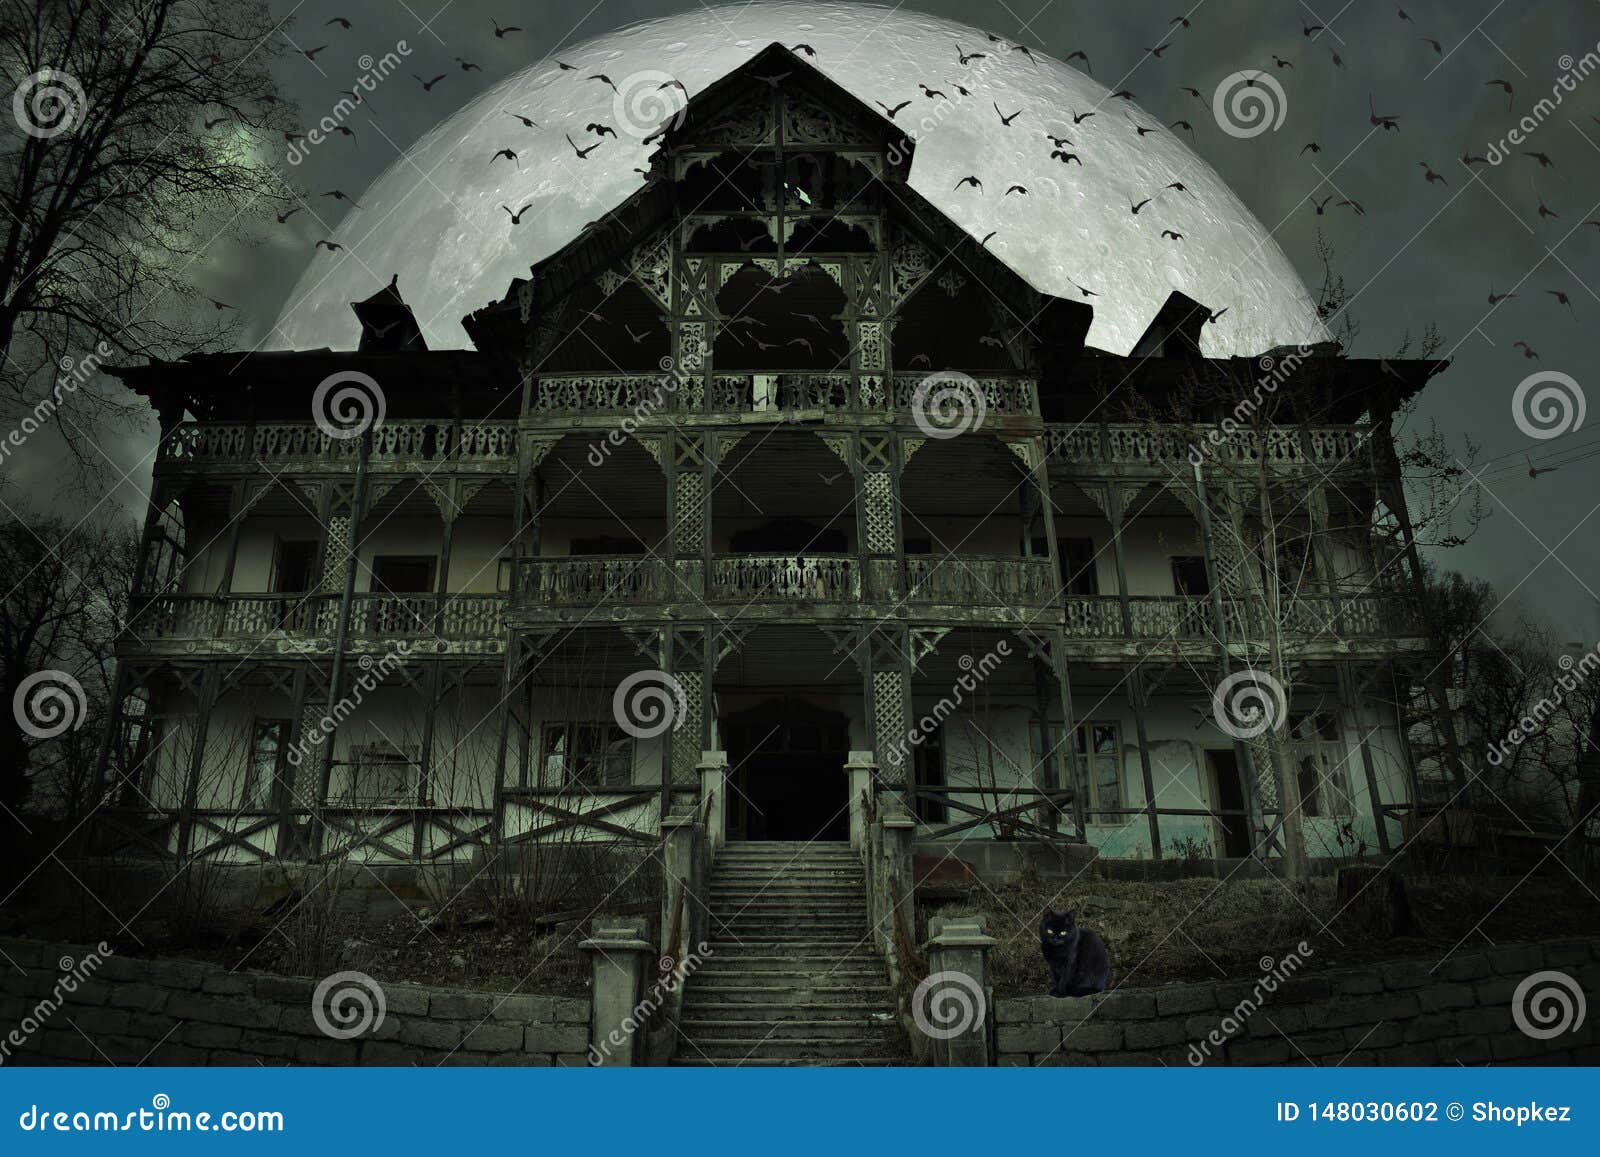 creepy haunted house with dark horror atmosphere. a black cat, many bats and big full moon behind the frightful scene